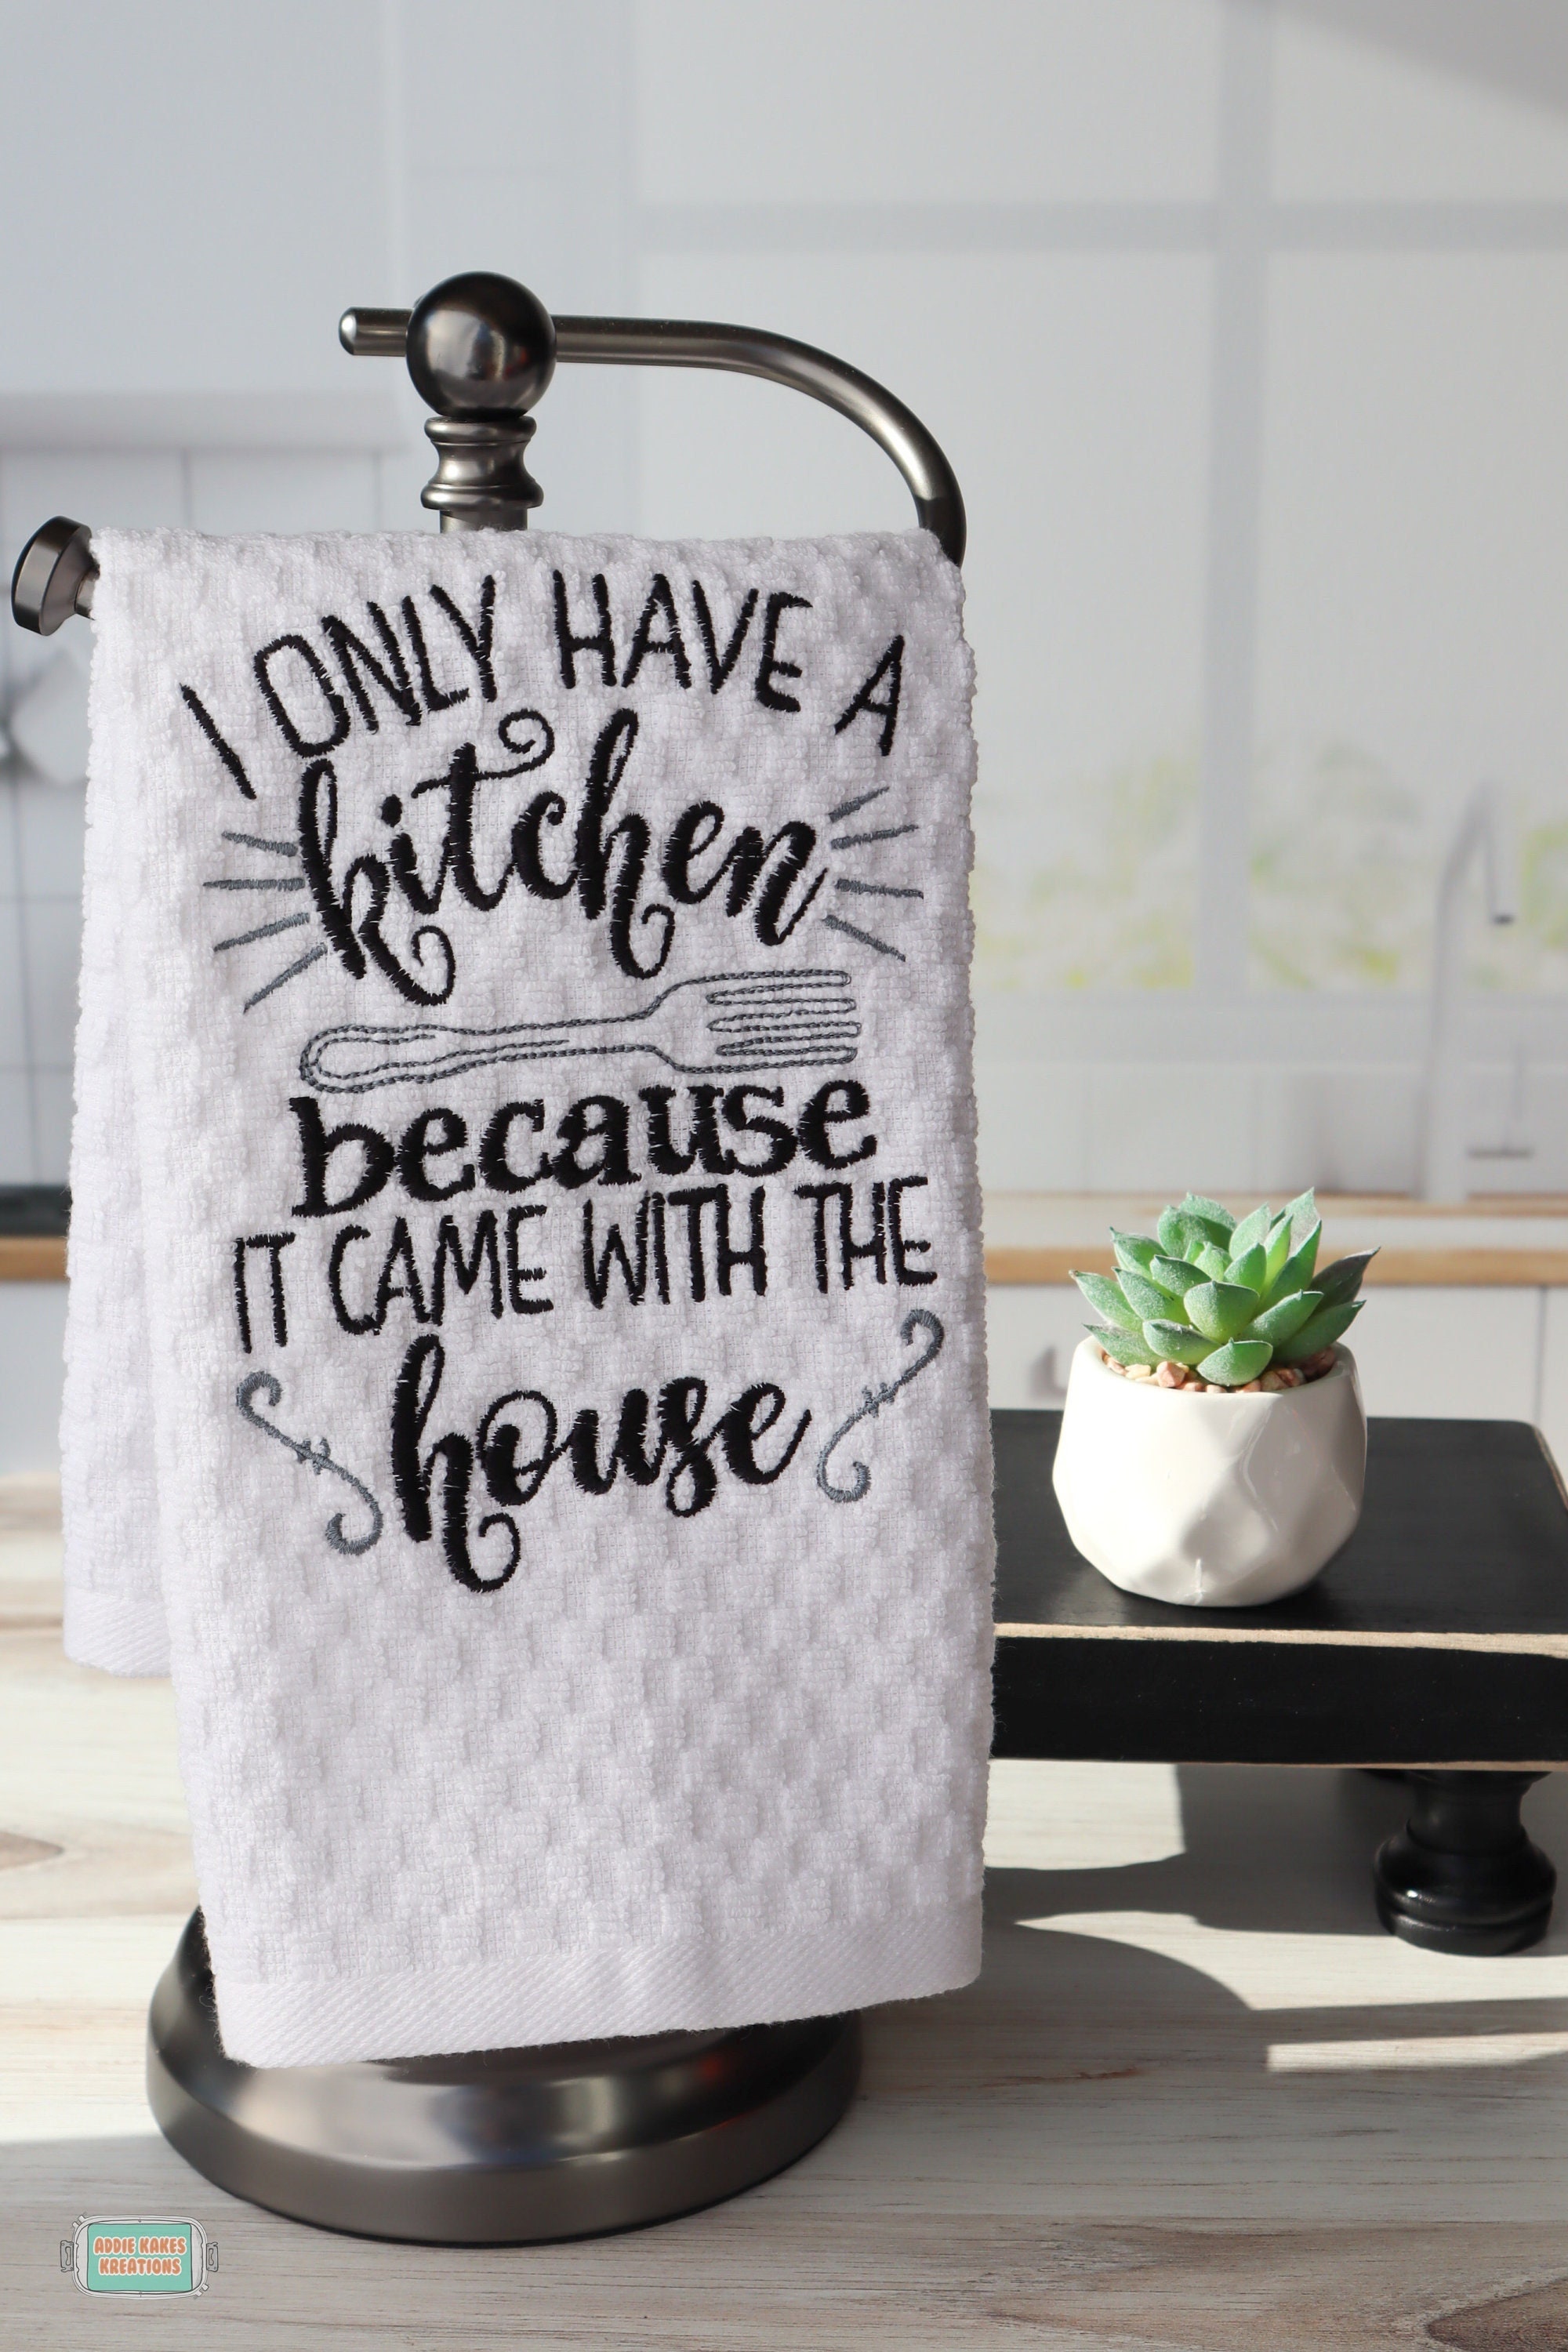 KITCHEN/TEA TOWELS — I AM HERE CARDS